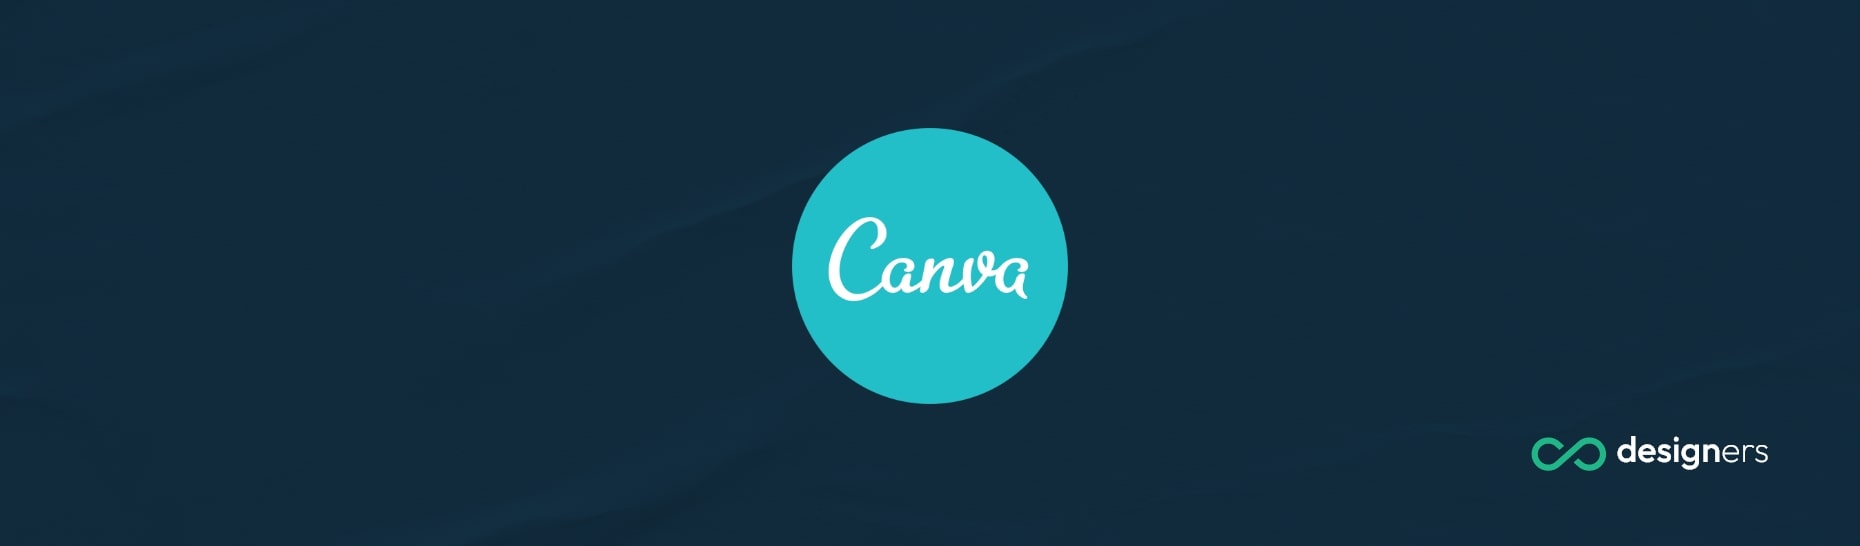 How Do I Remove a GIF Background in Canva? | design tools tutorials and  guides